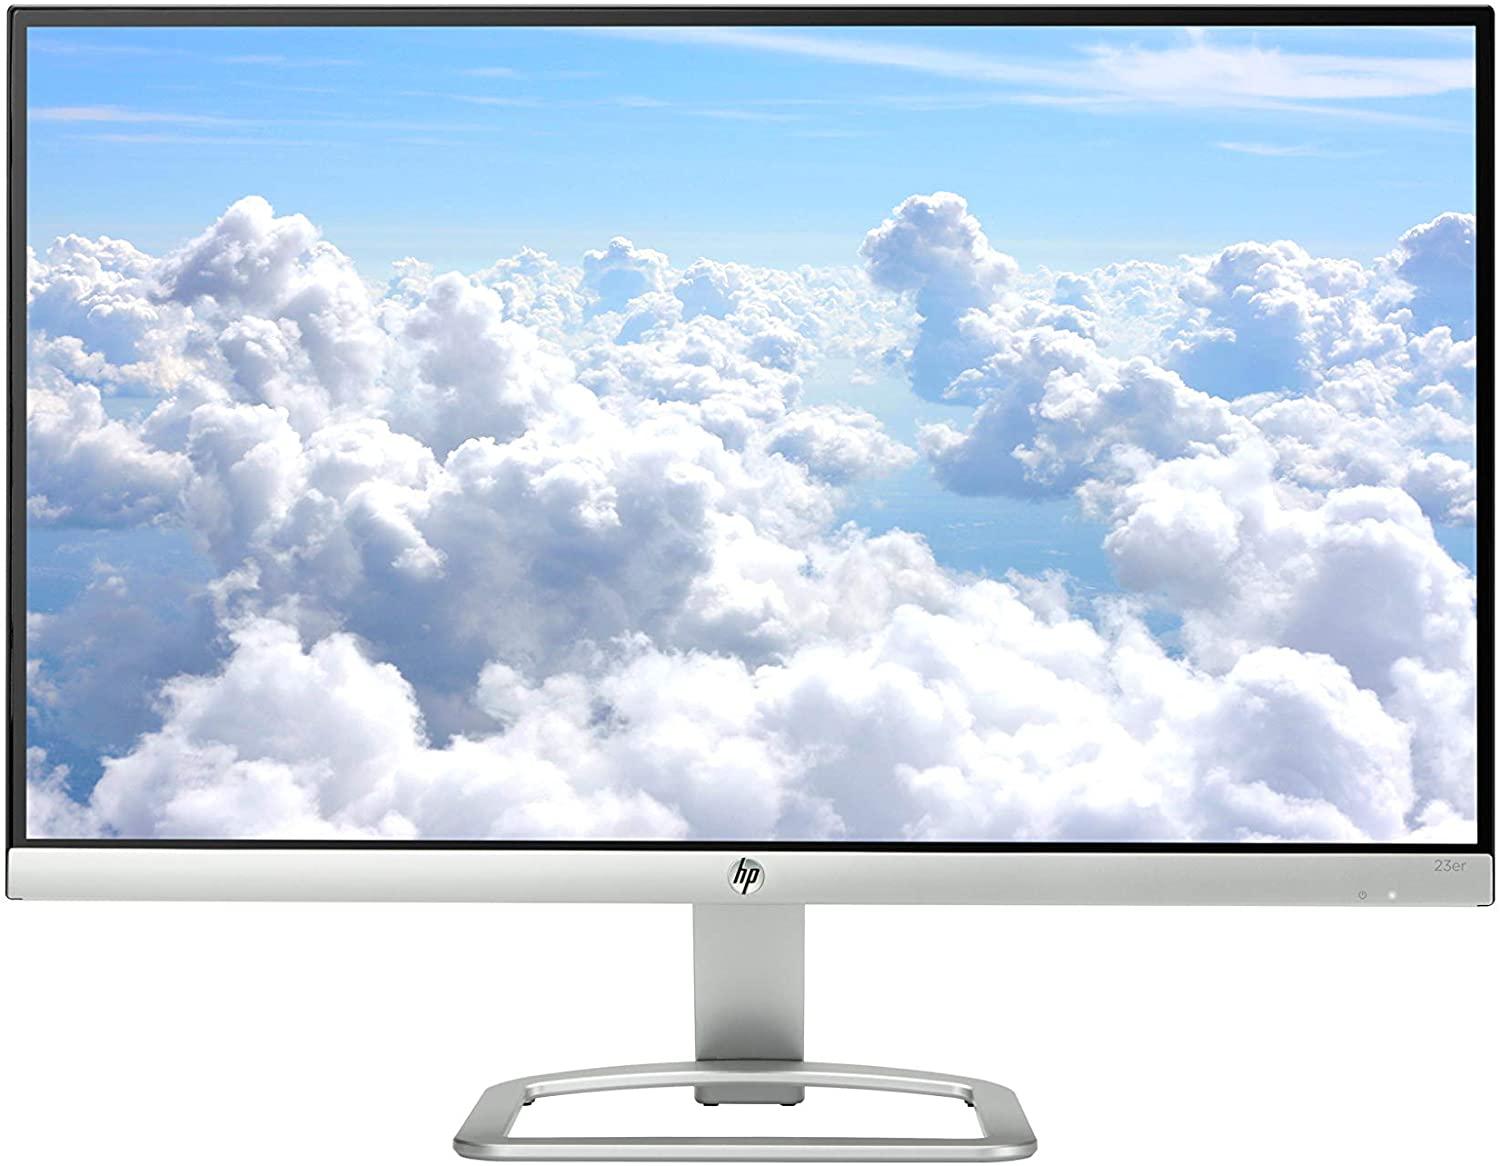 HP 23in Monitor + Wireless Keyboard and Mouse Combo for $105.44 Shipped